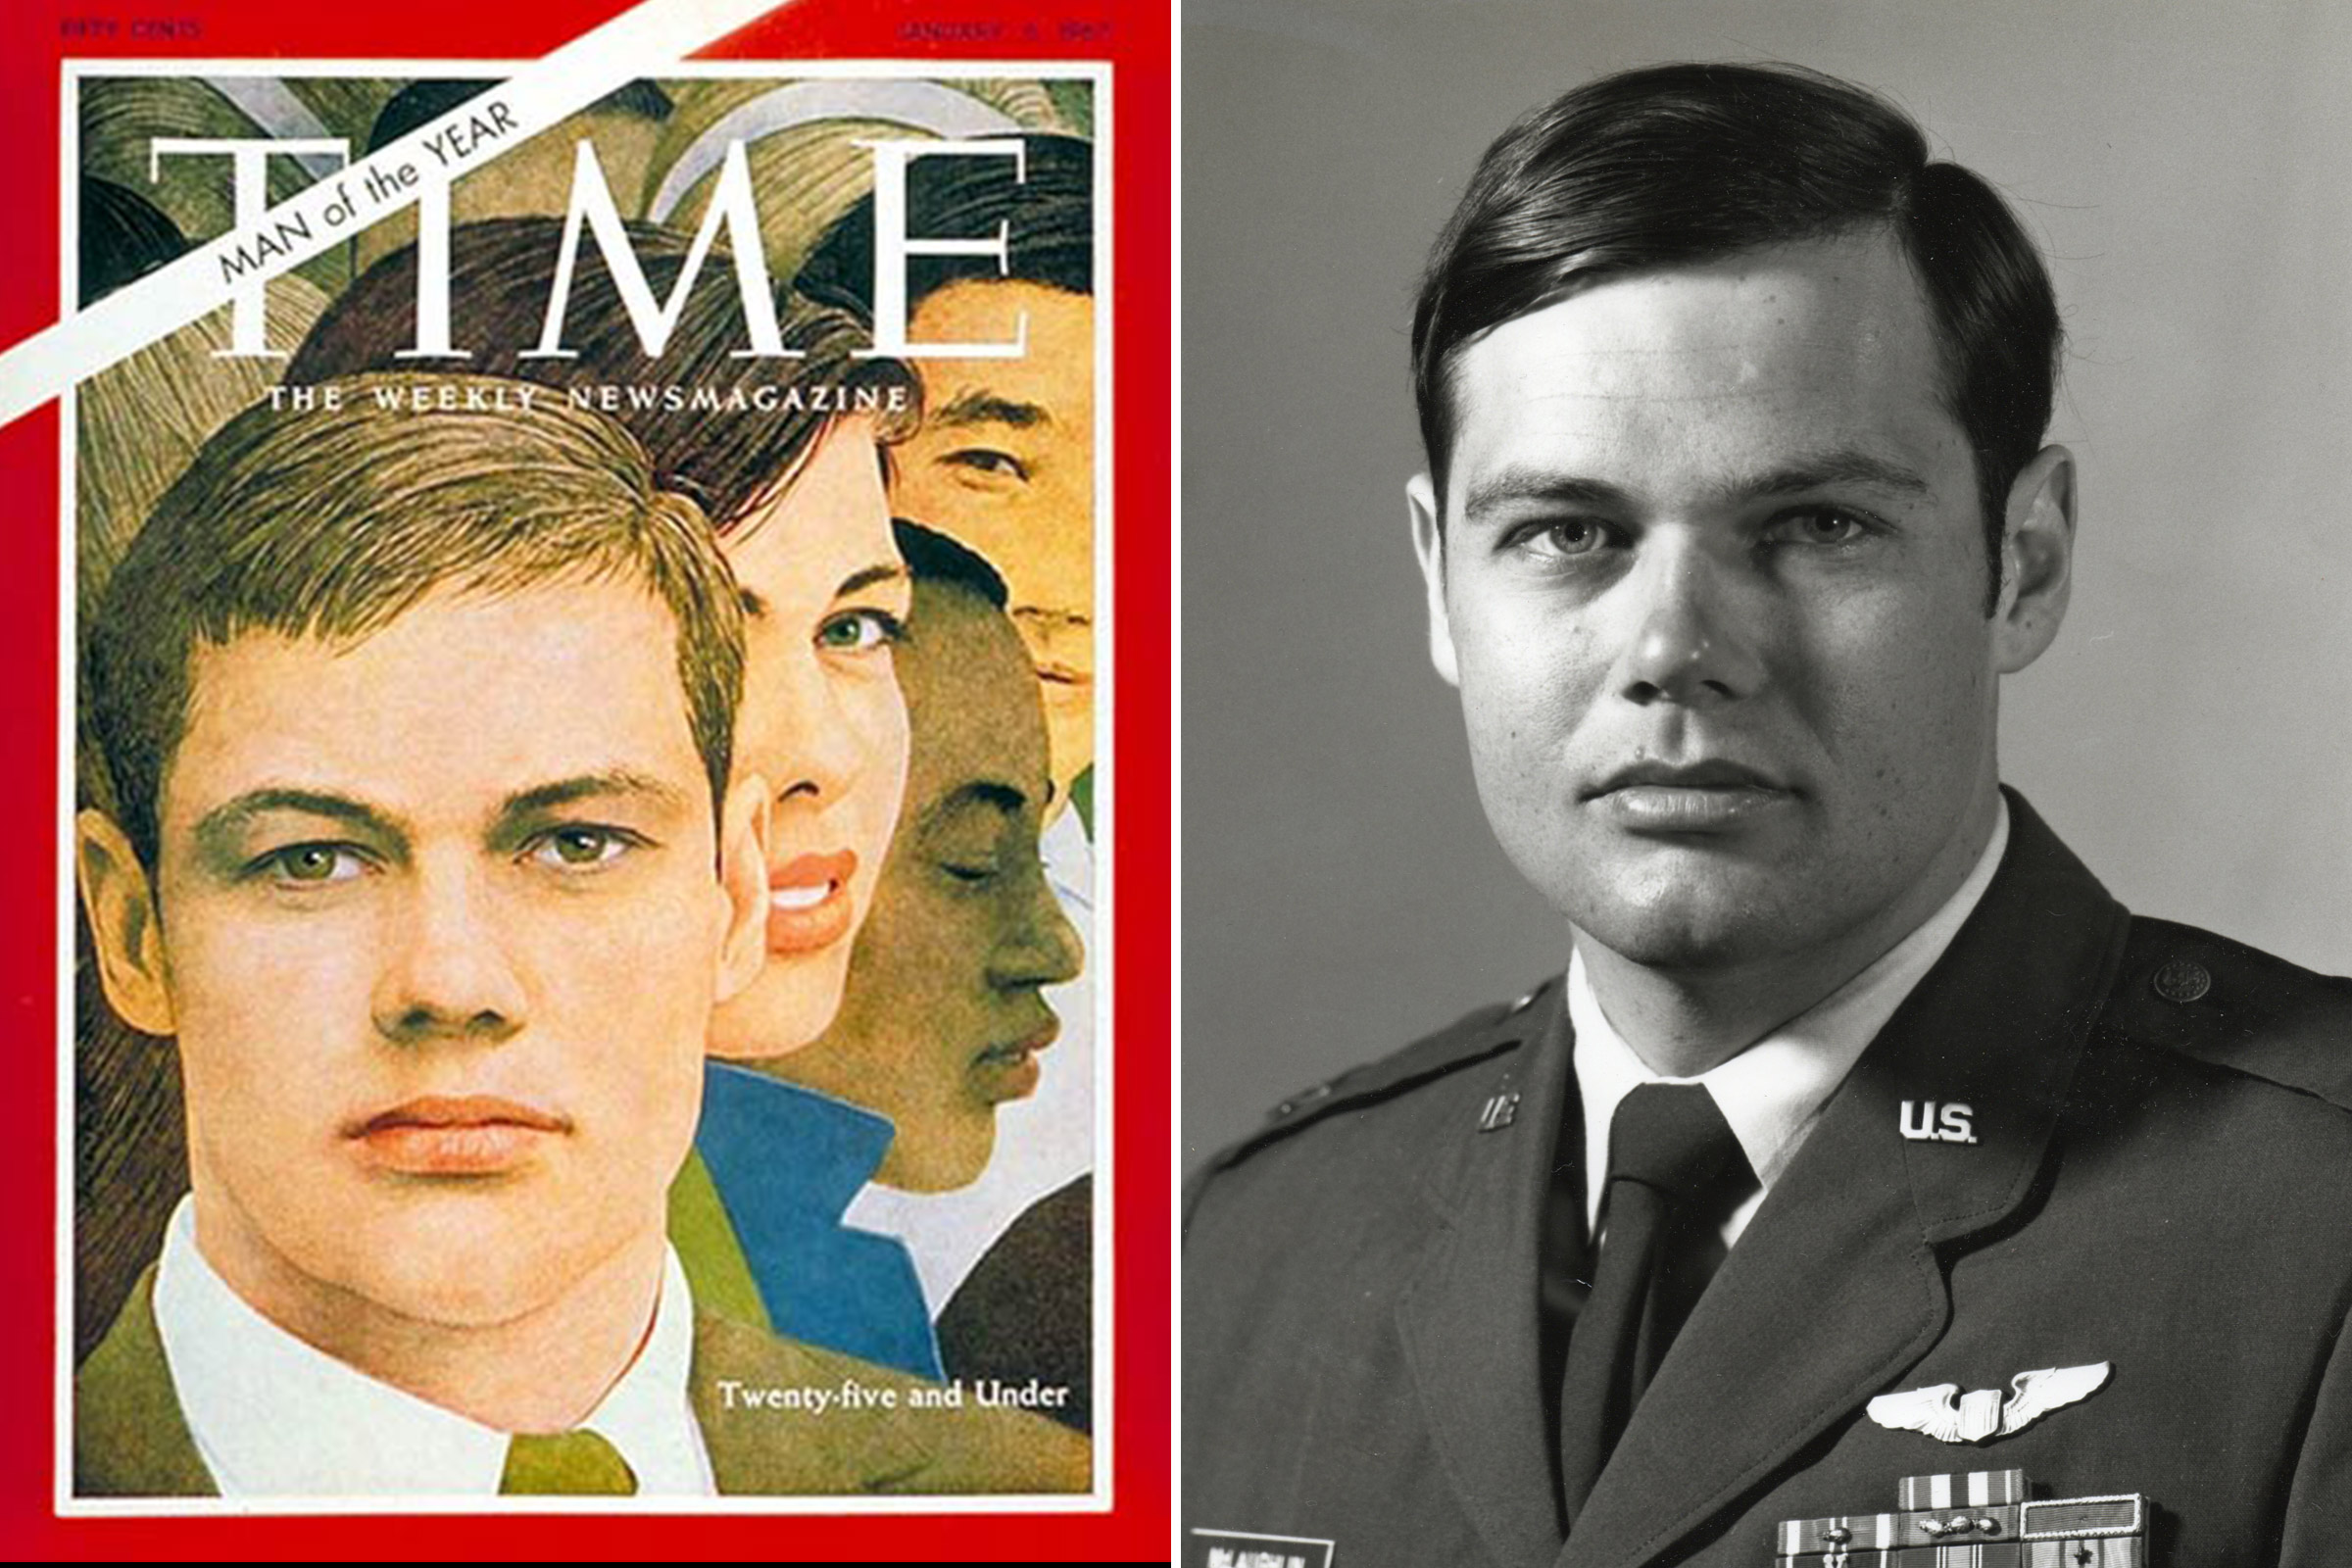 The Person of the Year 1966 cover image, at left, and Thomas McLaughlin in uniform. (Left: Robert Vickrey/TIME. Right: Courtesy of Sally McLaughlin.)